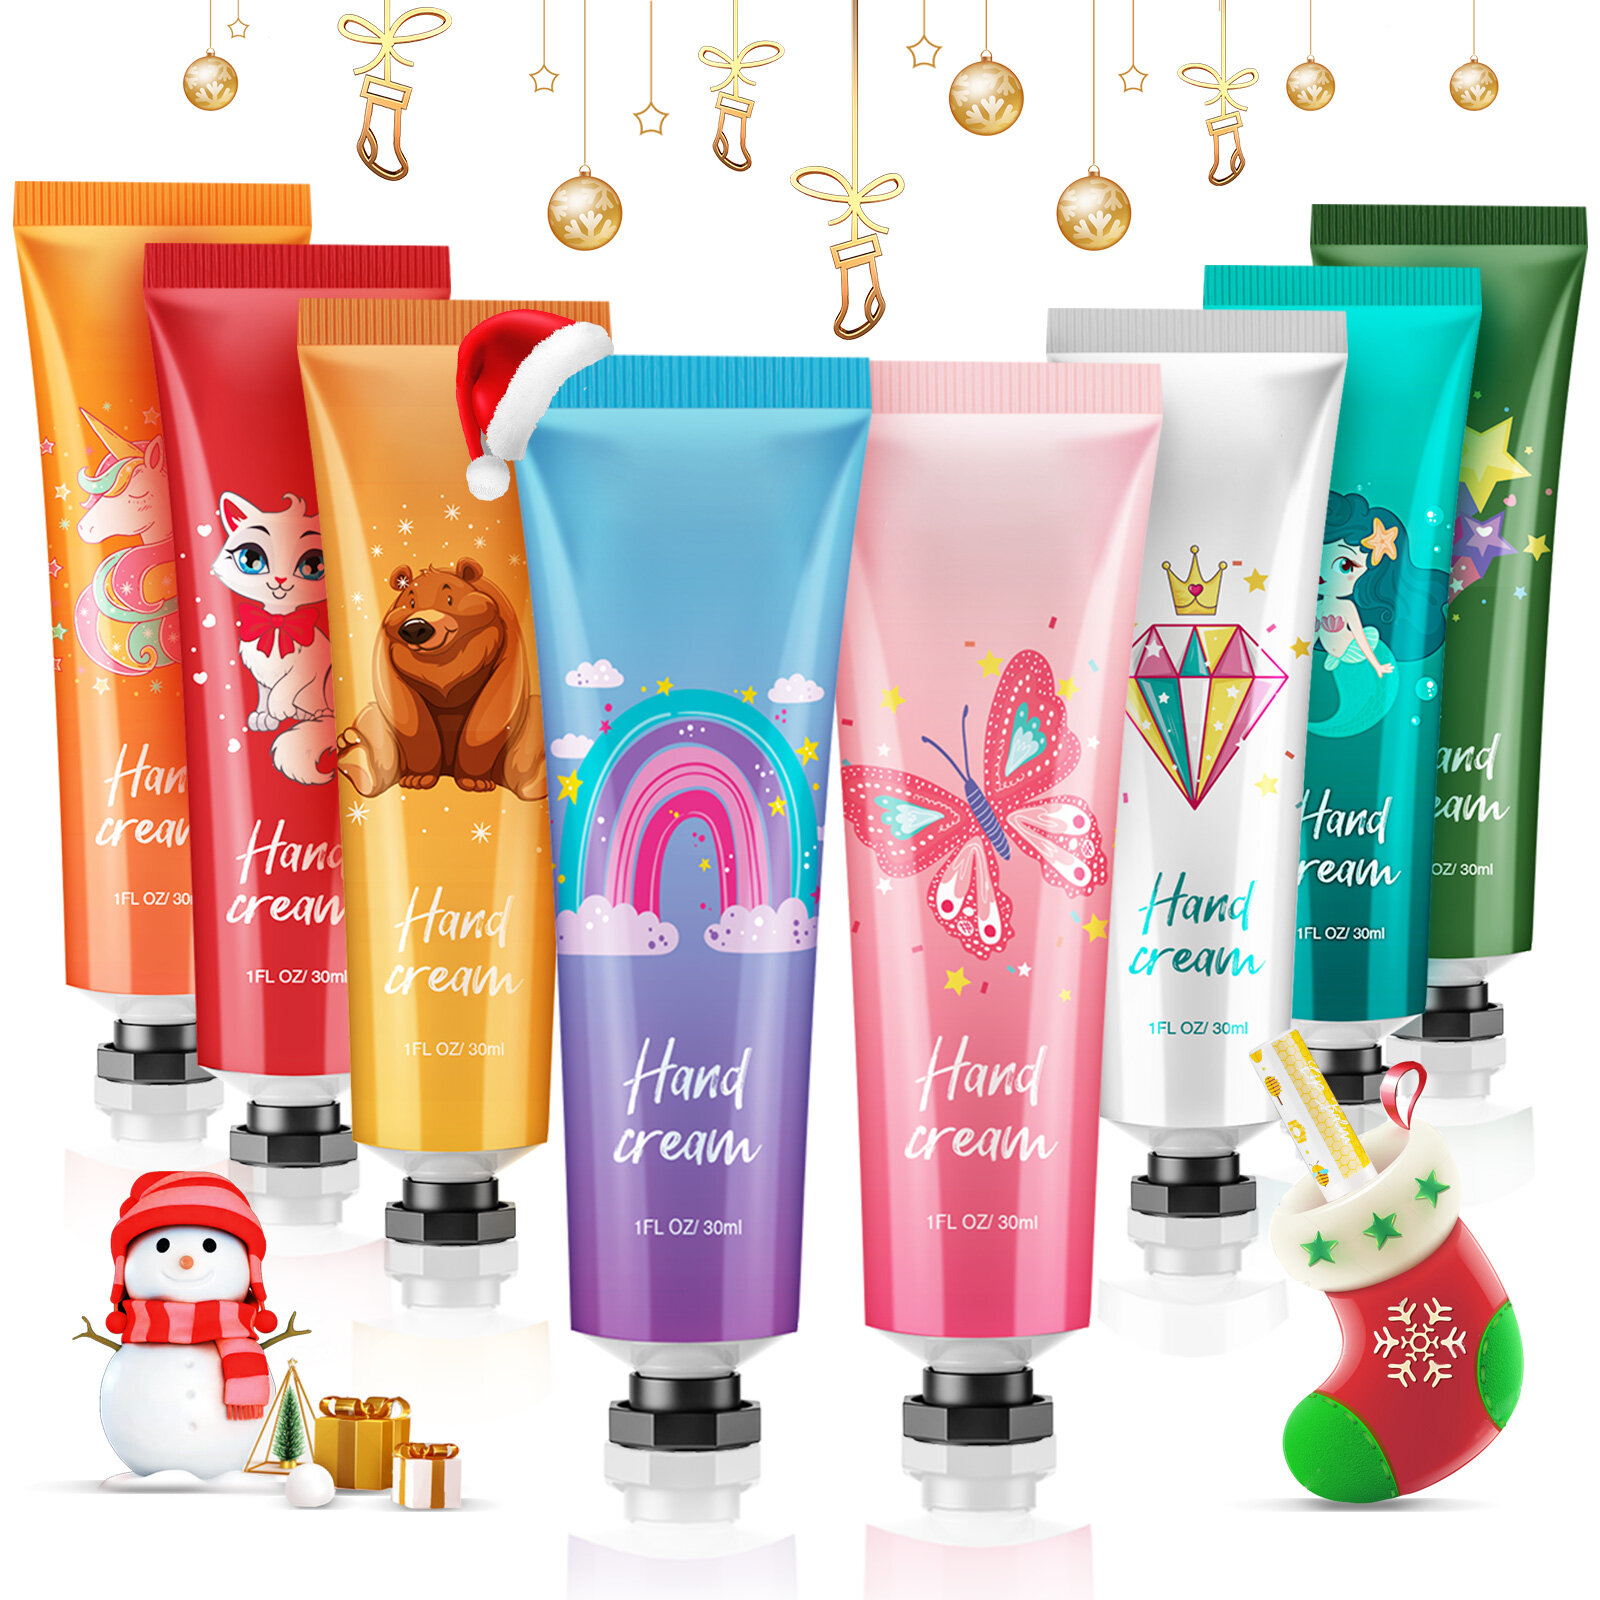 GLAMADOR Hand Cream Gift Set 9 Pcs Travel Size Hand Lotion 30ml with Lip Balm Hand Cream for Dry Cracked Hands, Deeply M